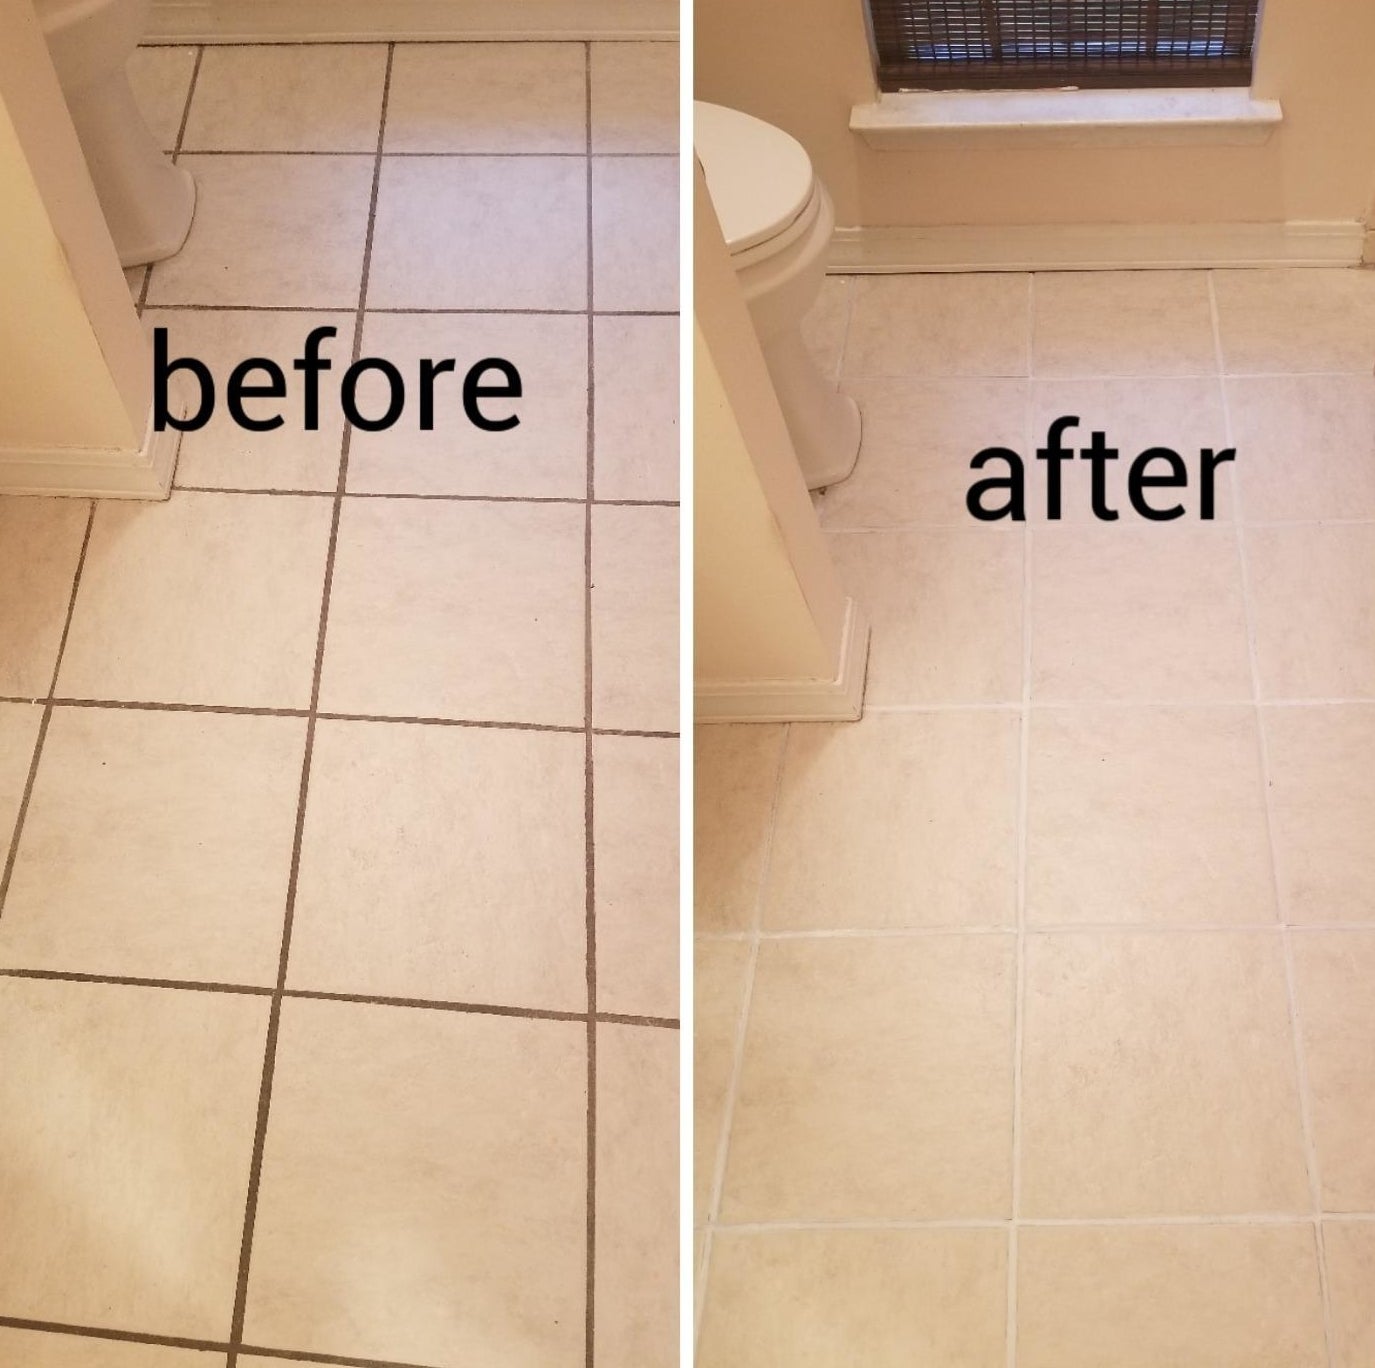 Before of reviewer&#x27;s tiles with brown grout vs after shot white grout